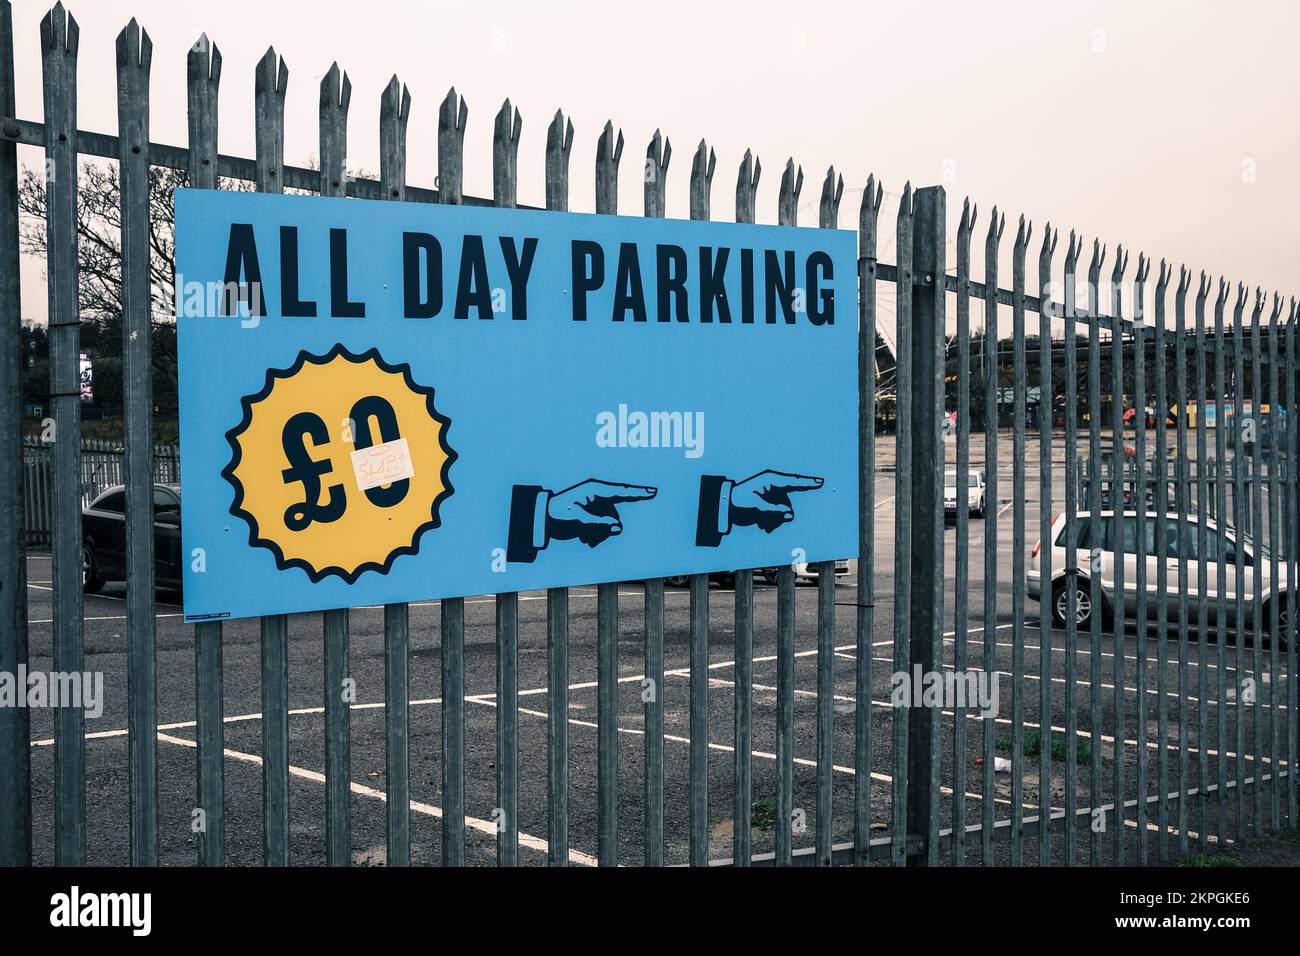 All Day Parking Sign, Dreamland, Margate, Kent, UK Stock Photo